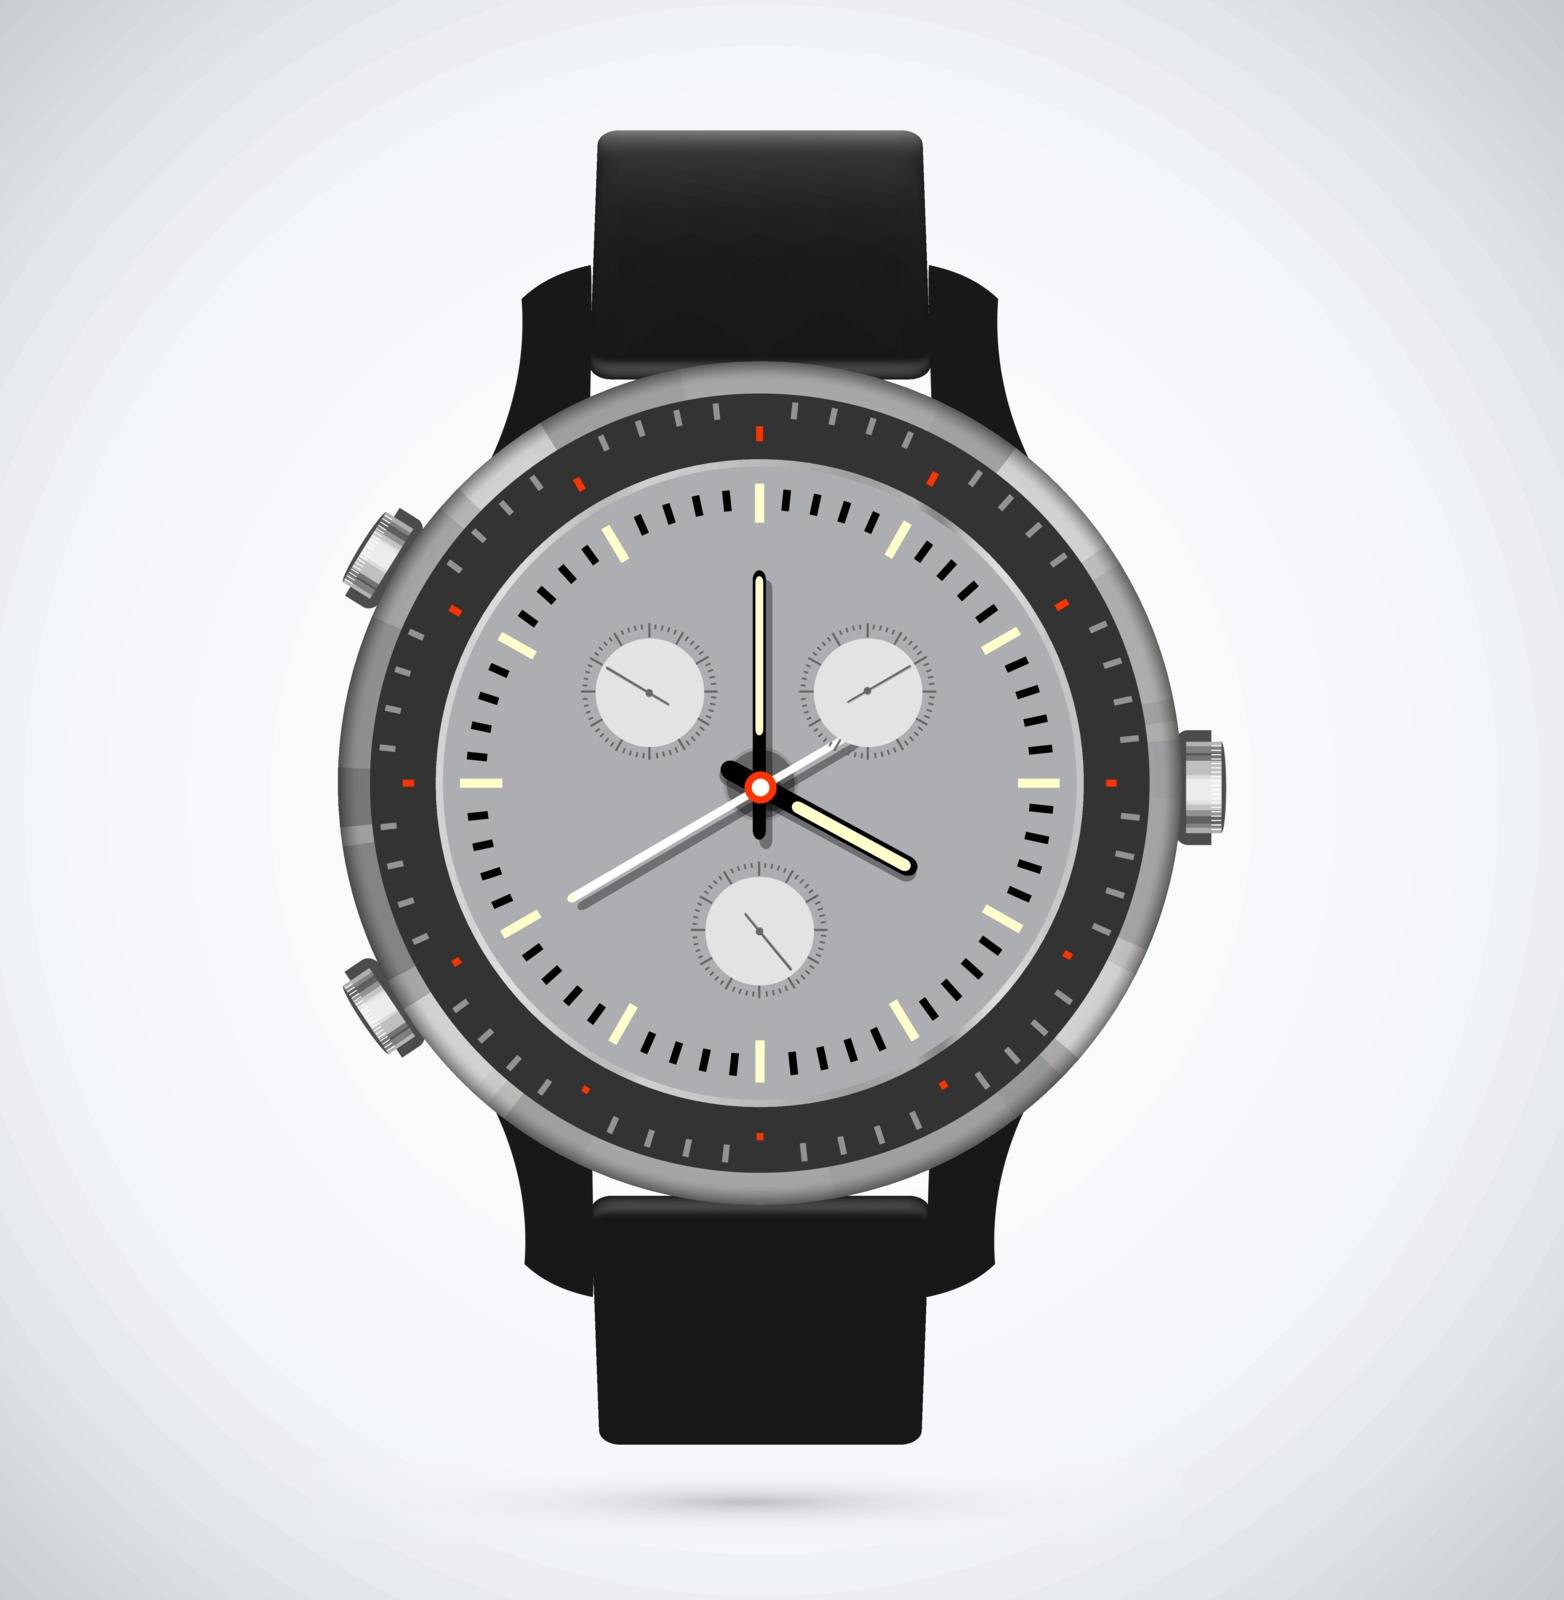 The design of modern and fashionable watch with a black dial and arrows